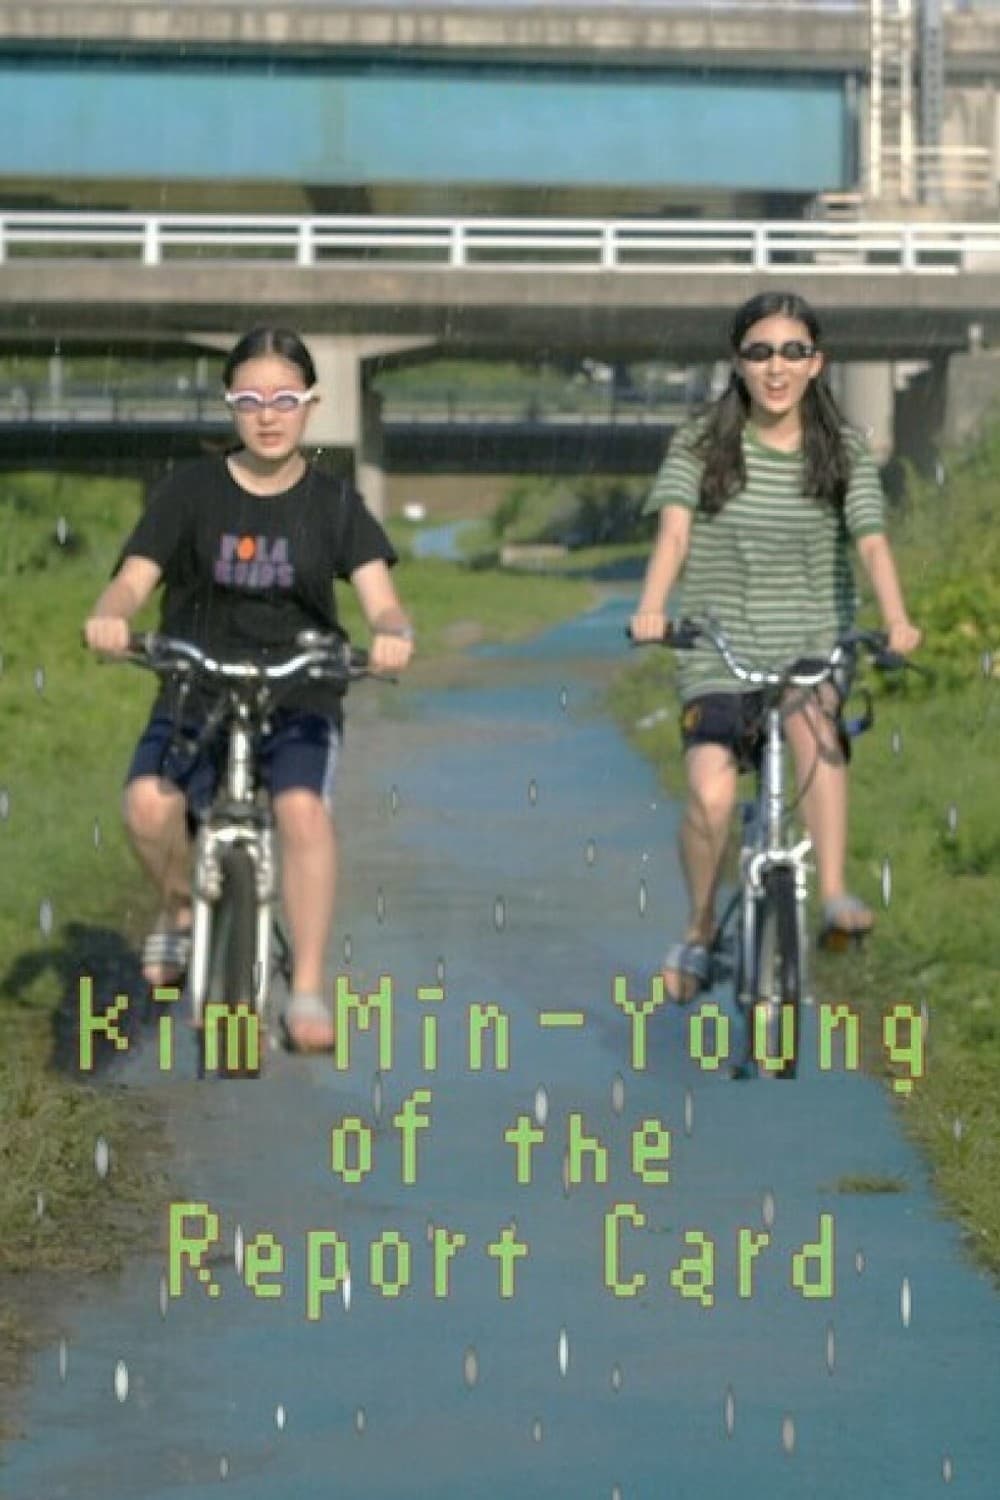 Kim Min-young of the Report Card